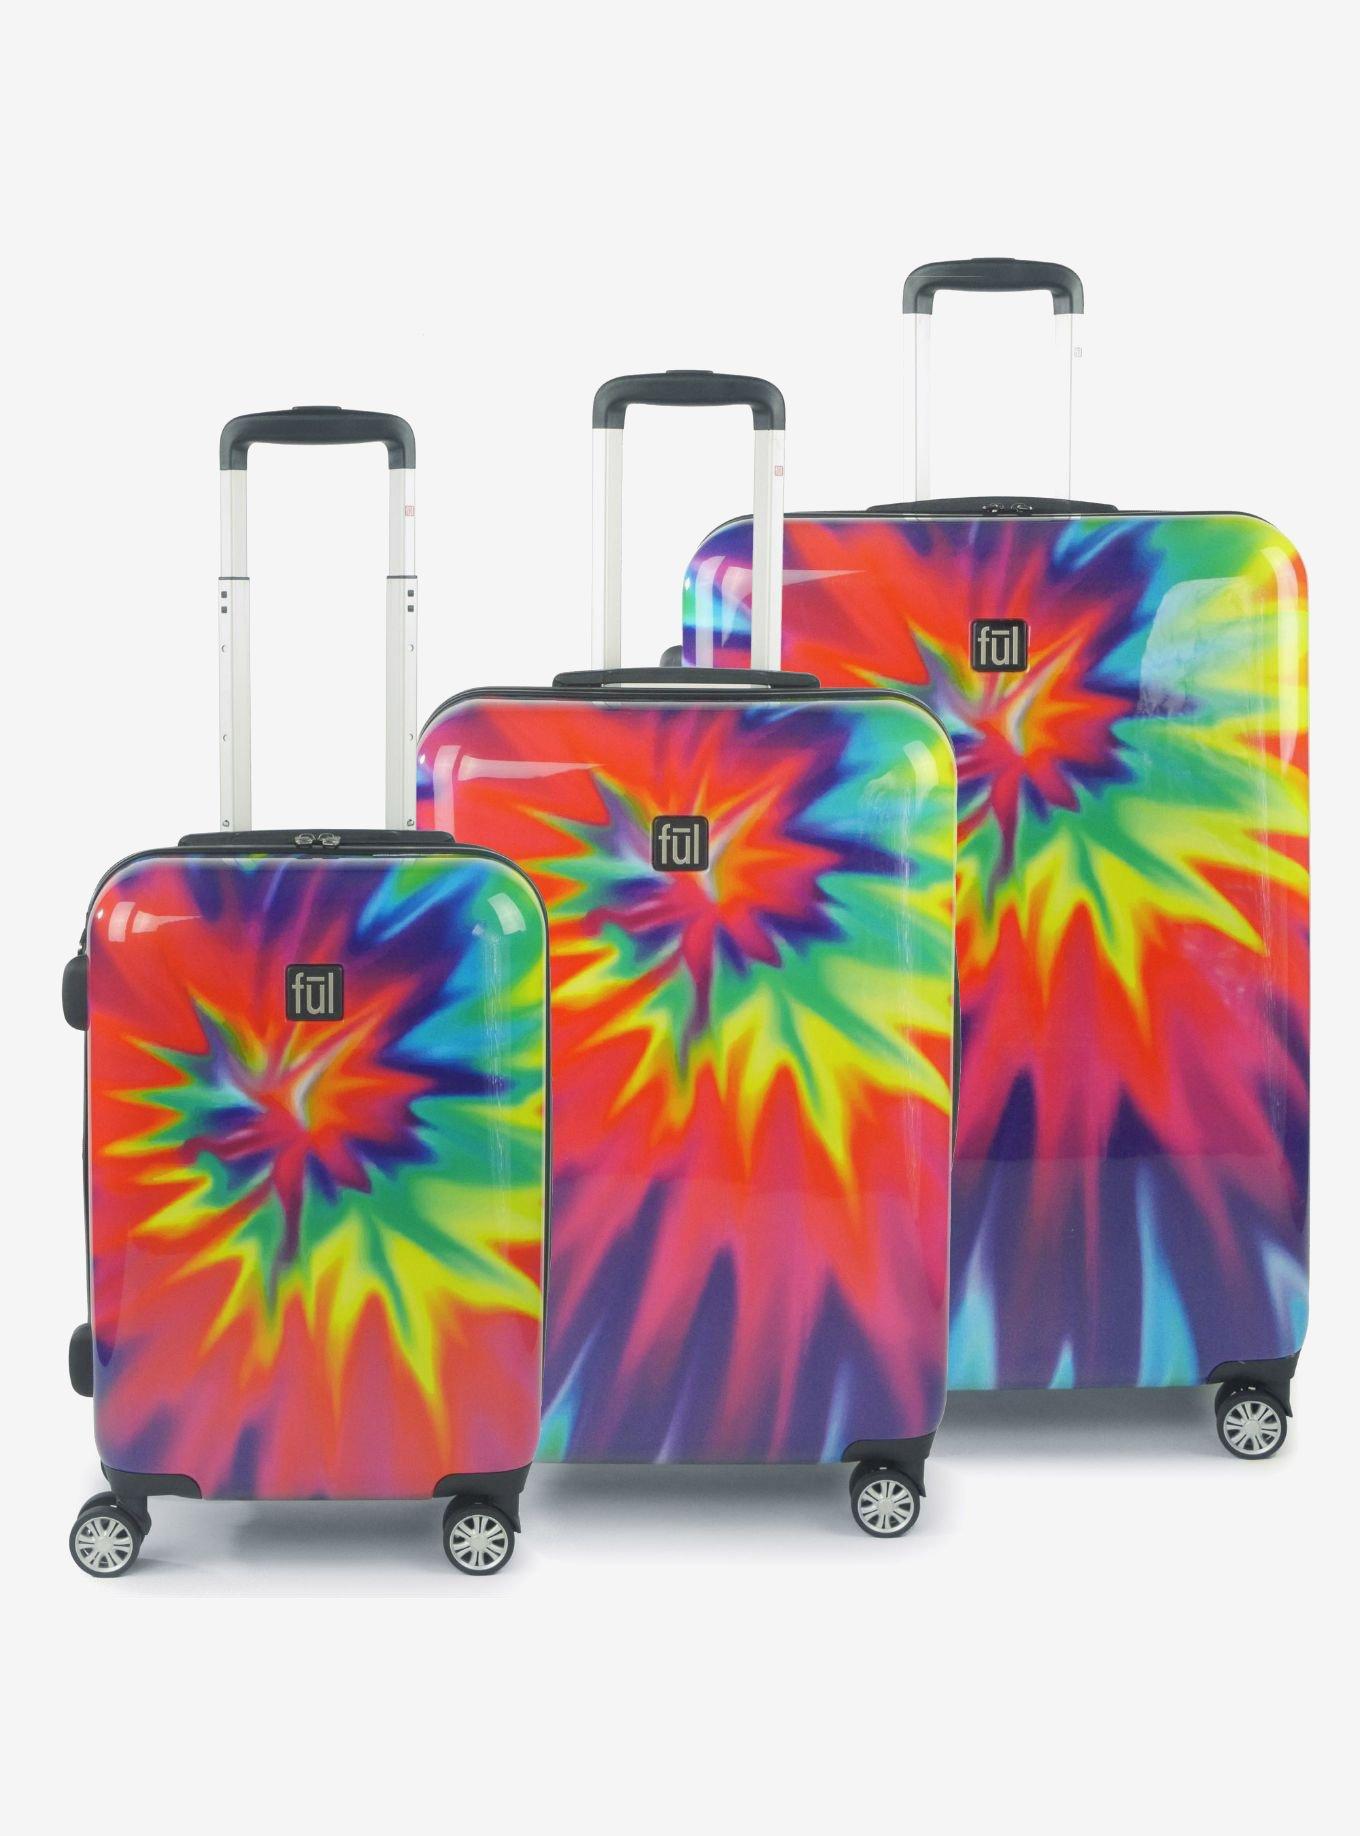 FUL Tie Dye Spinner Rolling Luggage Suitcase Nested 3 Piece Luggage Set ...